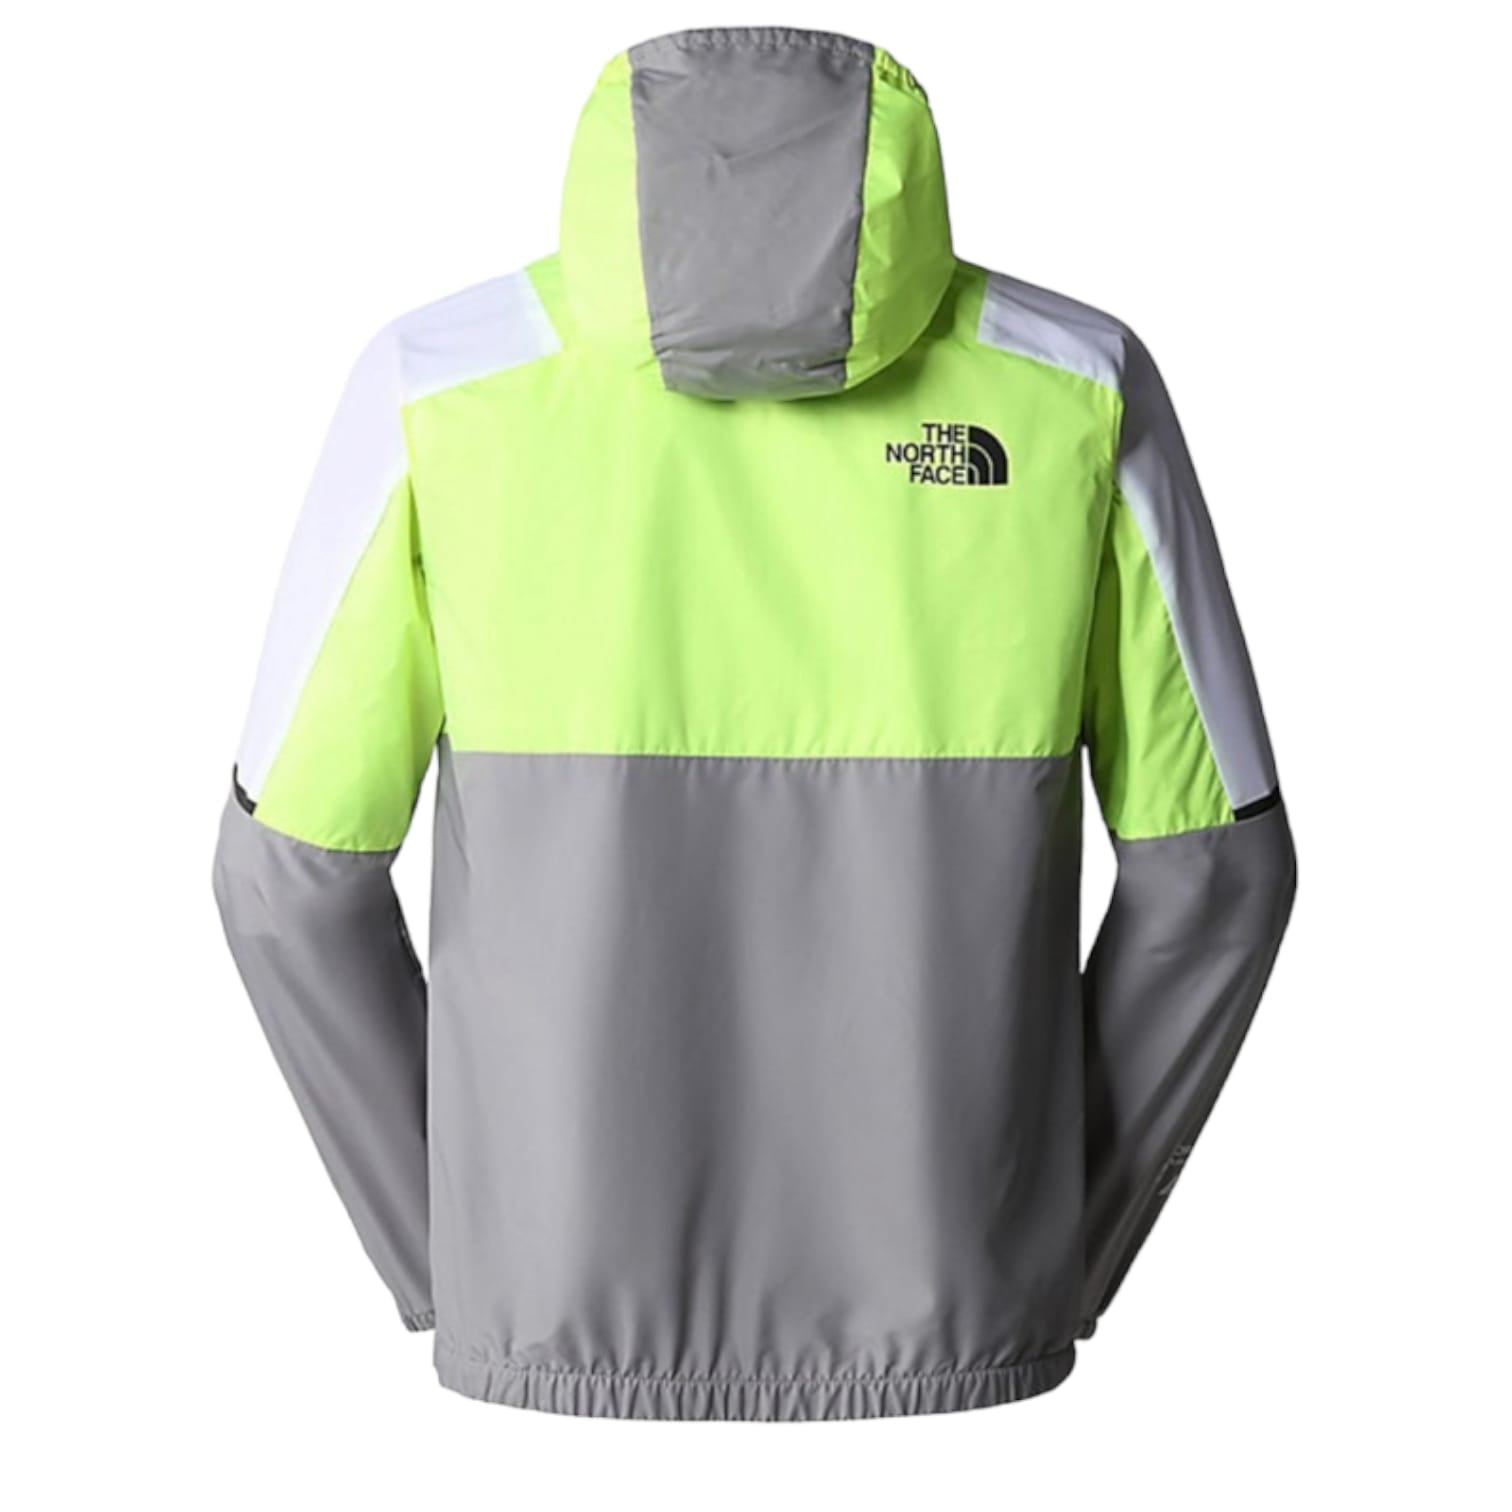 The North Face Giacca Uomo